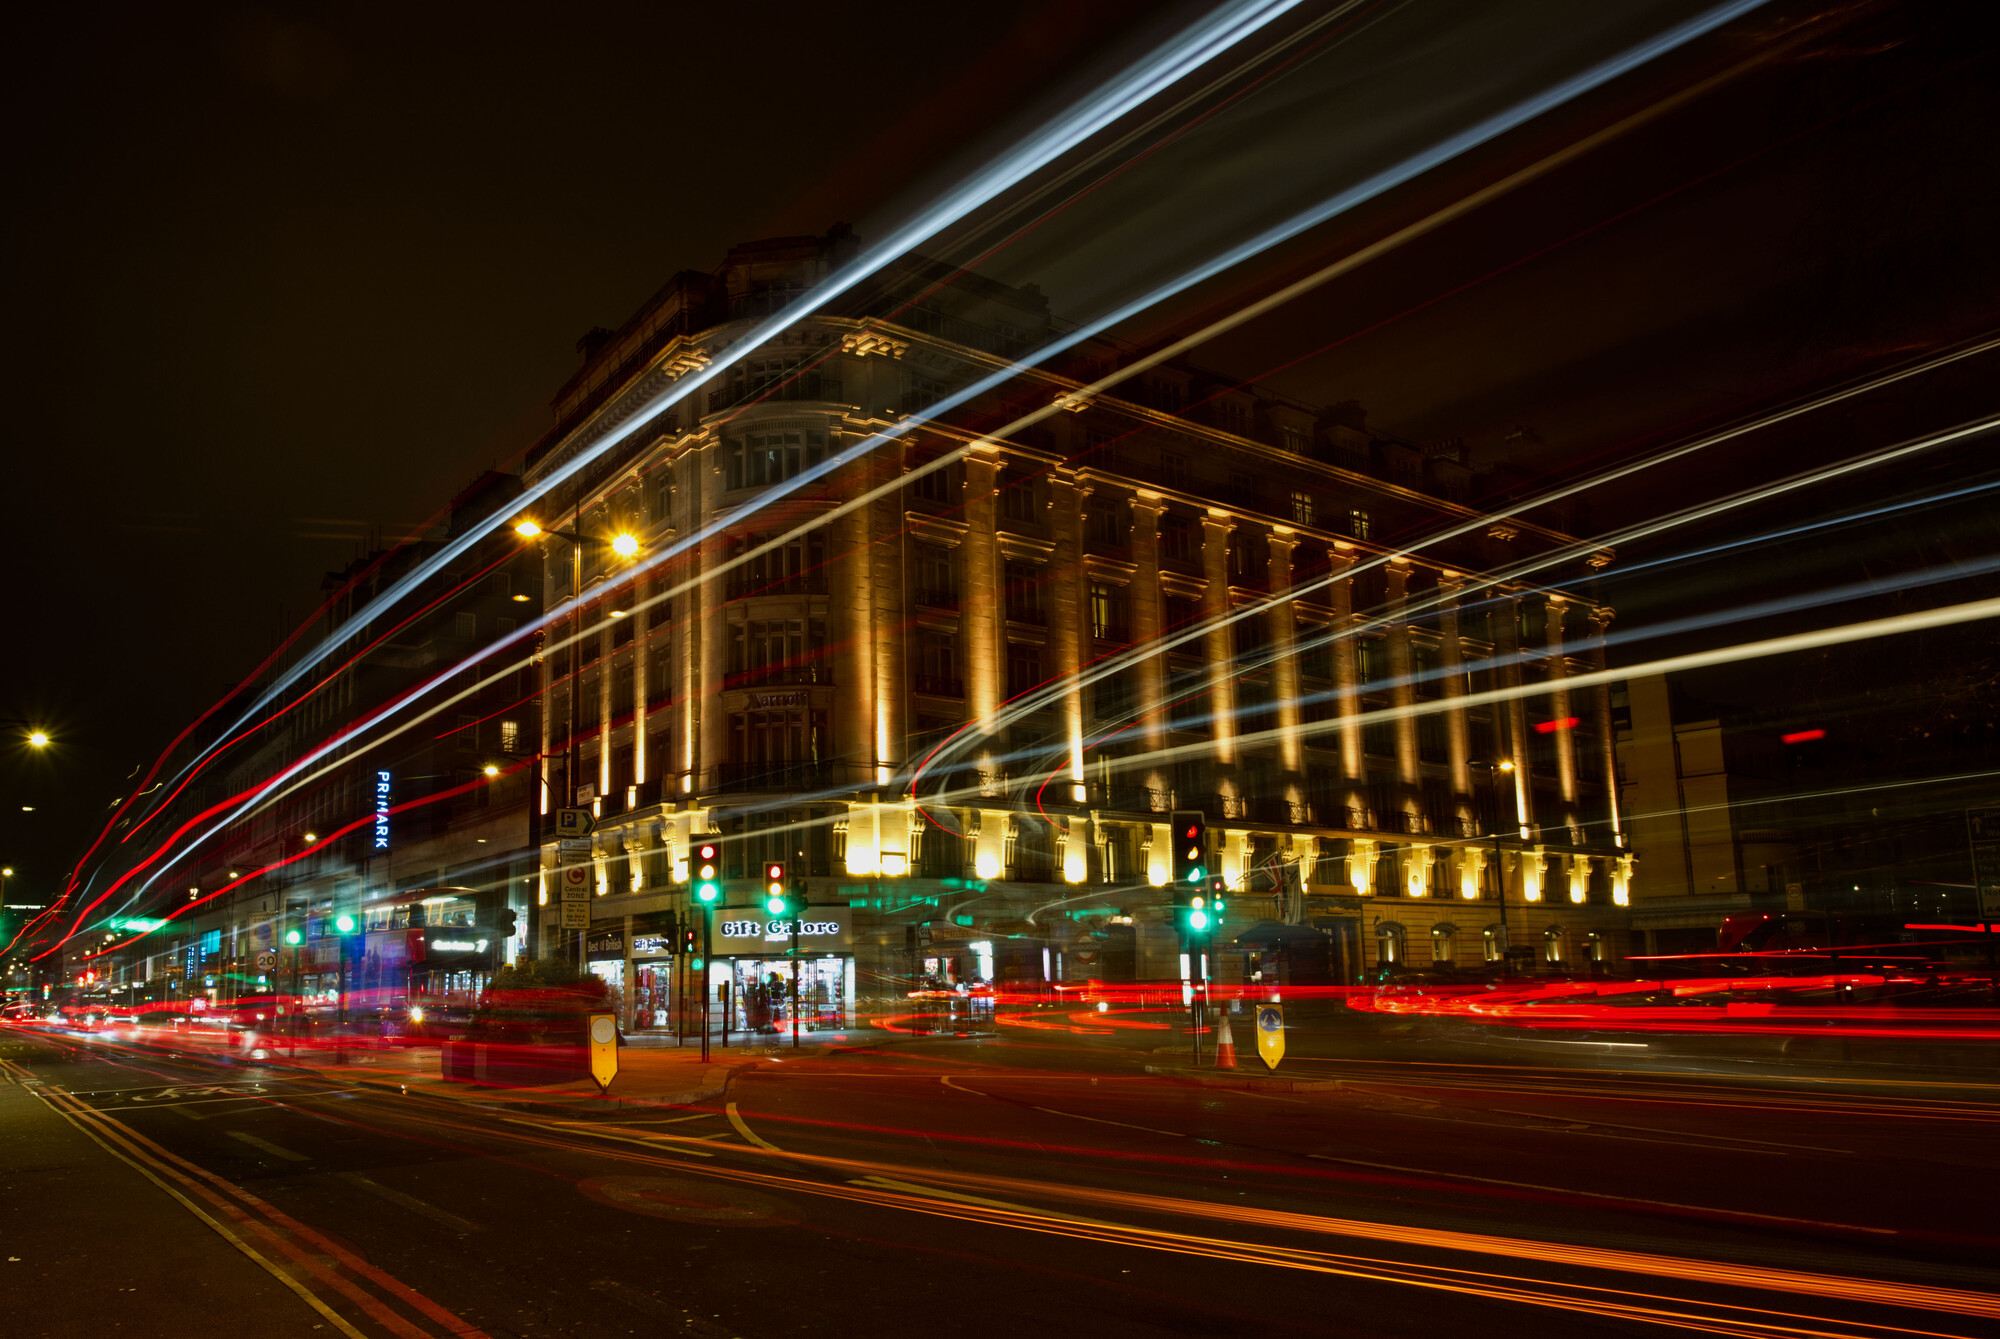 photographer Dangermouse long exposure  photo taken at Marble Arch, London